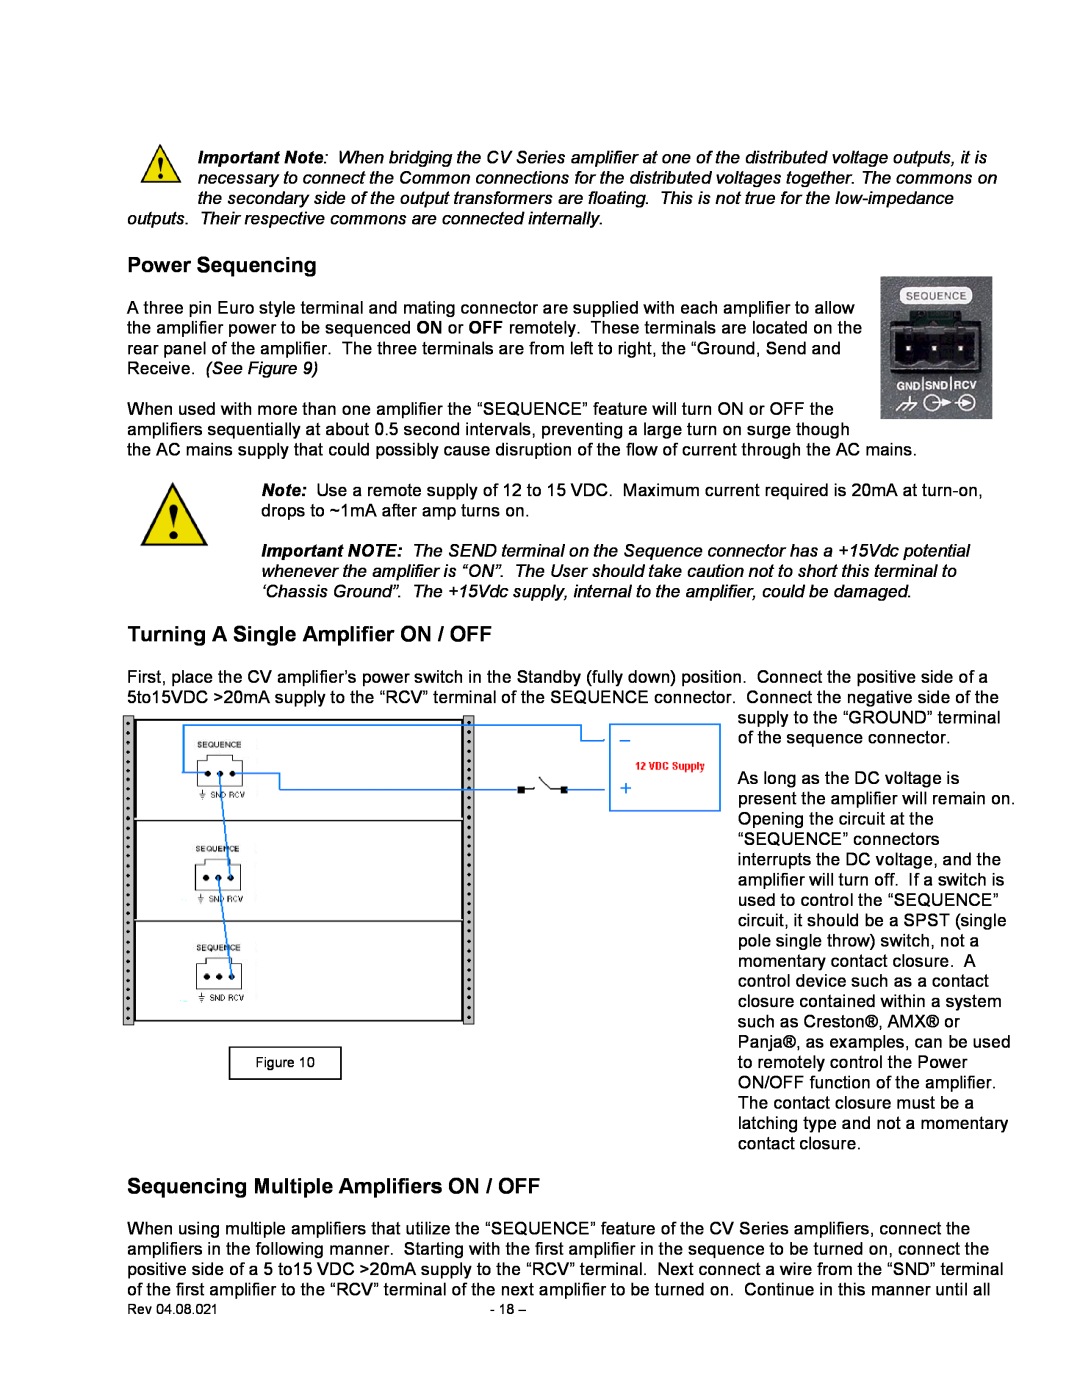 Carver CV Series user manual Power Sequencing, Turning A Single Amplifier ON / OFF, Sequencing Multiple Amplifiers ON / OFF 